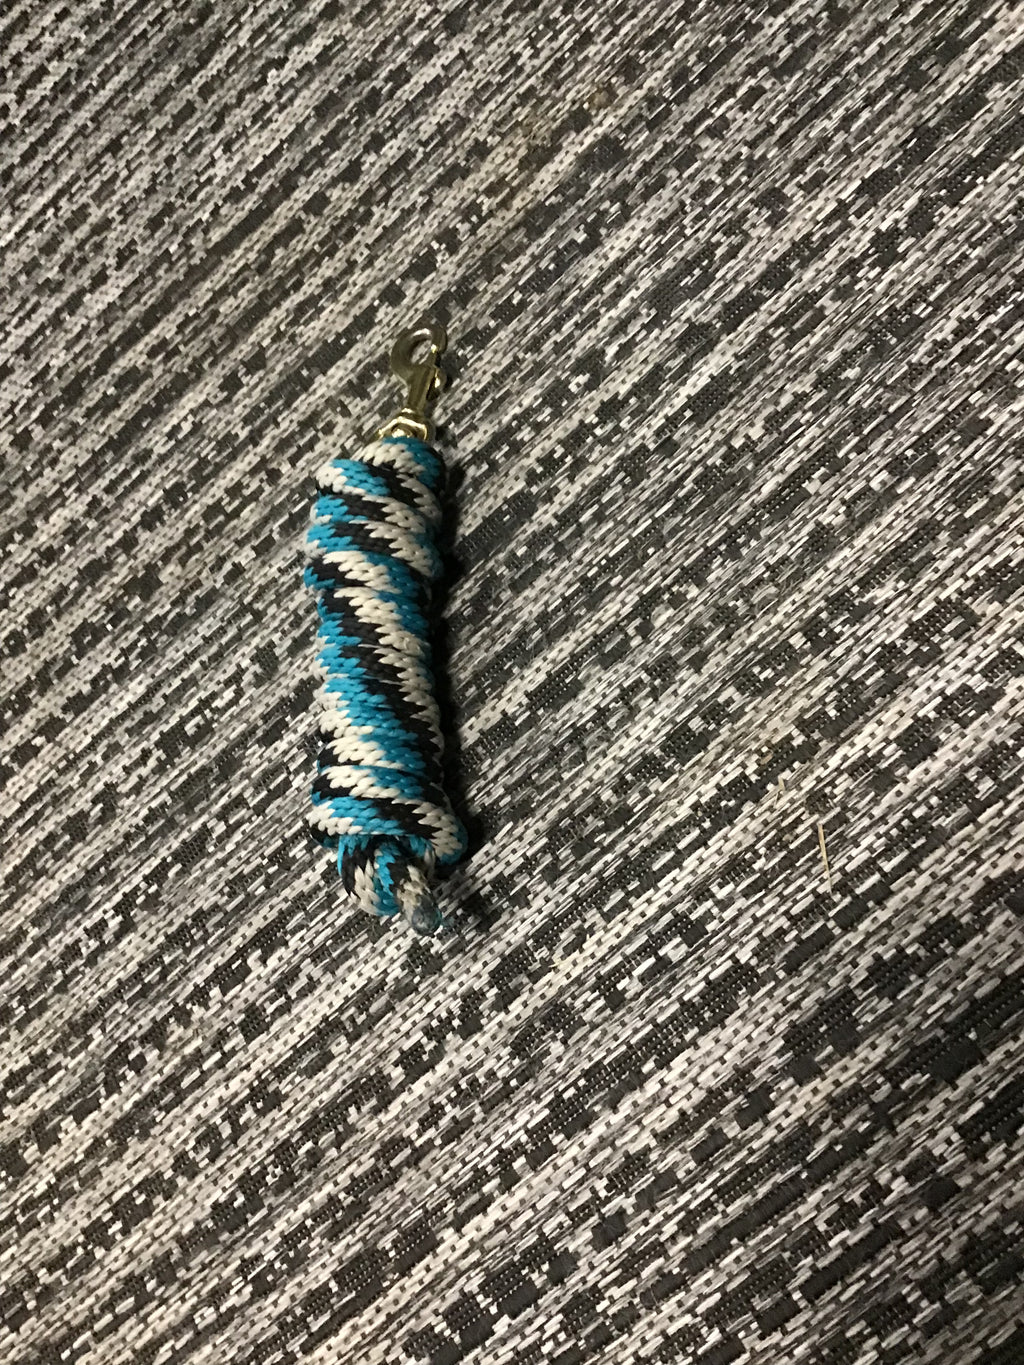 Teal and blue lead rope